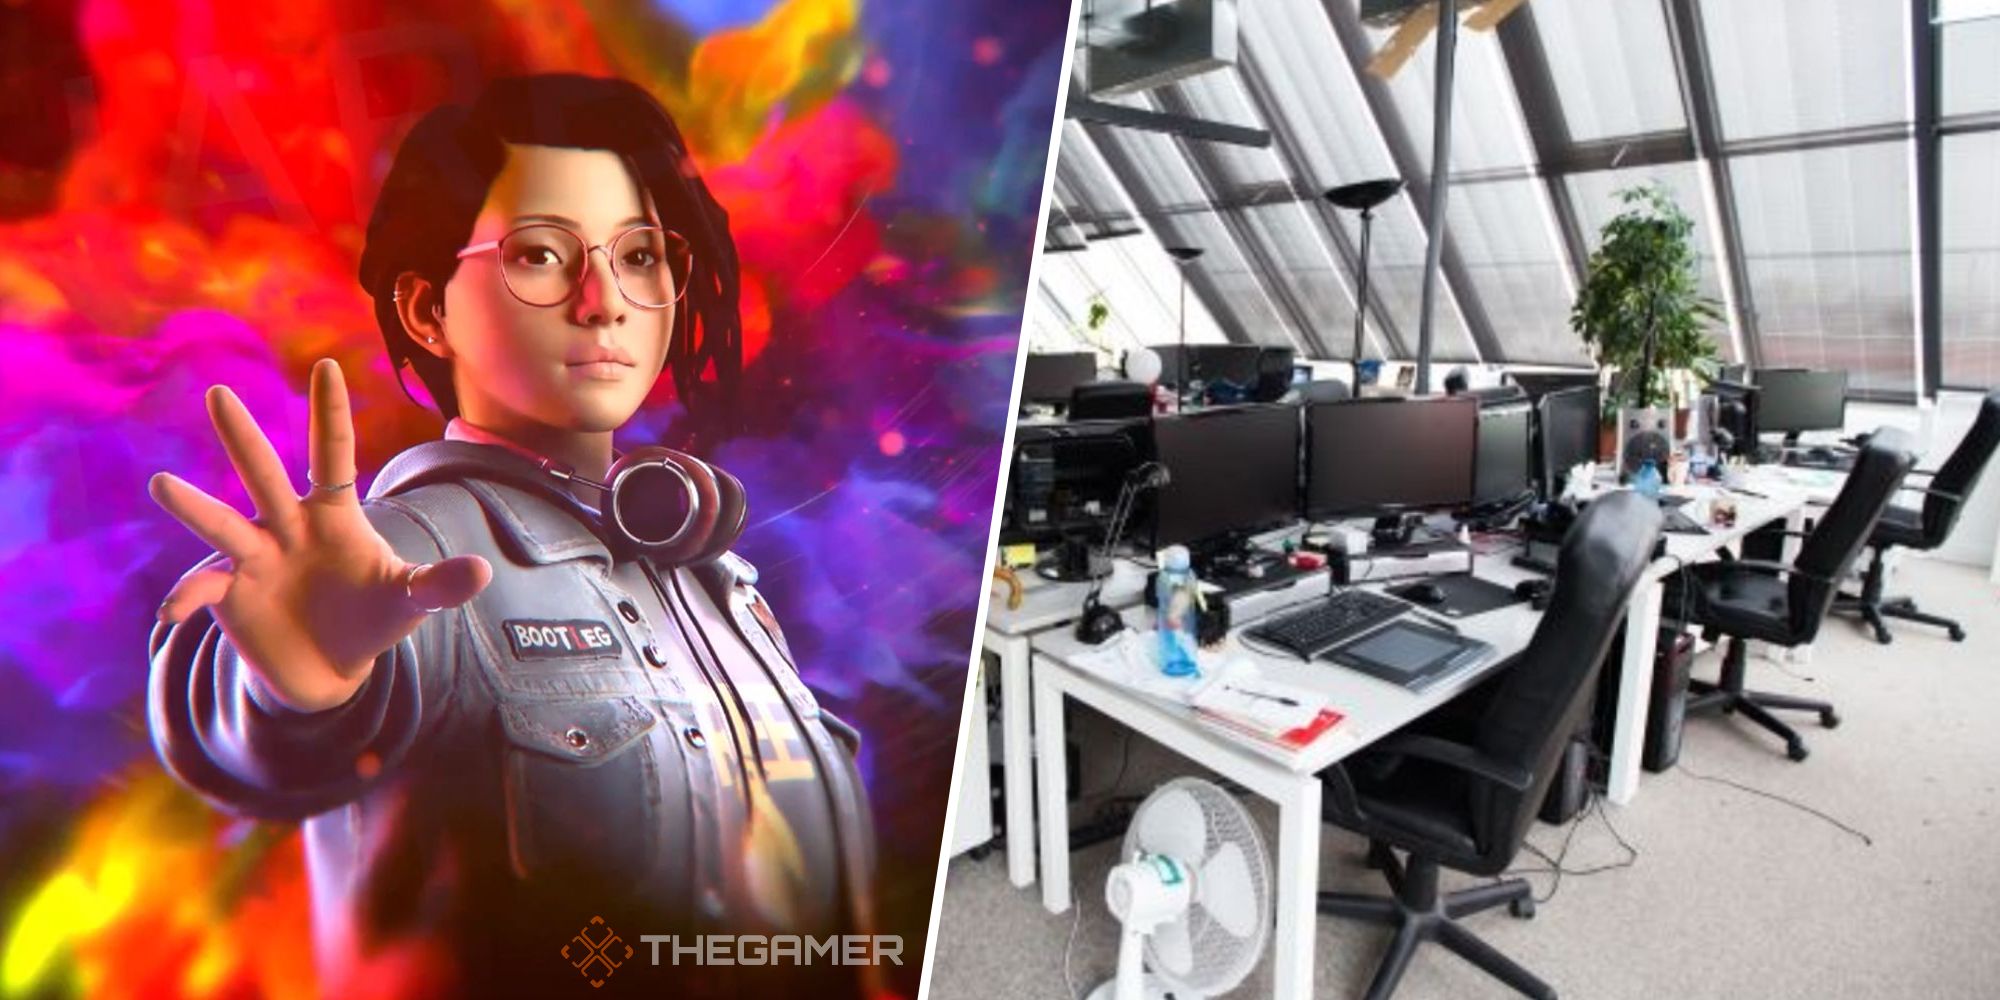 Protagonist from Life is Strange True Colors on the left, Dontnod office on the right